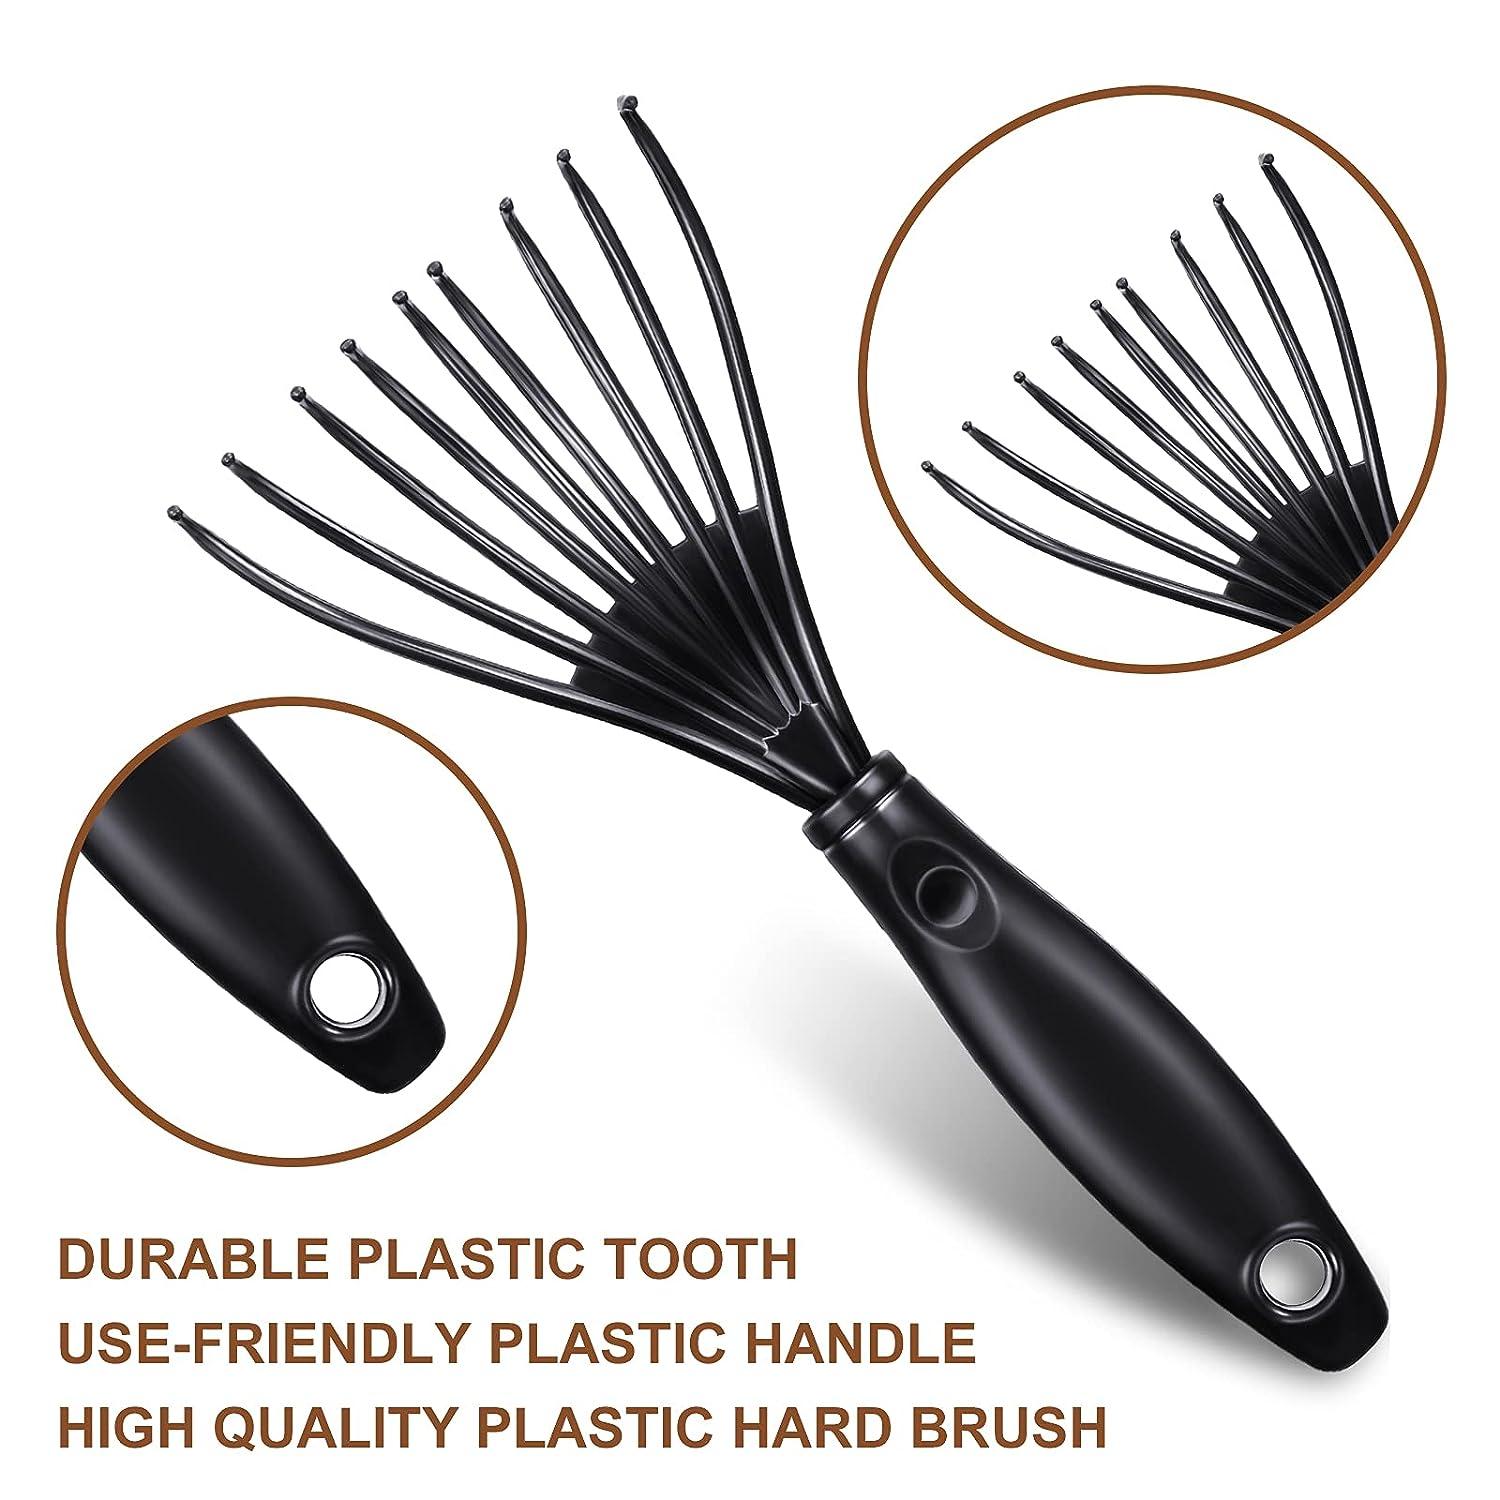 Jewelry Solution Comb Cleaning Brush Hair Brush Cleaner Tool Comb